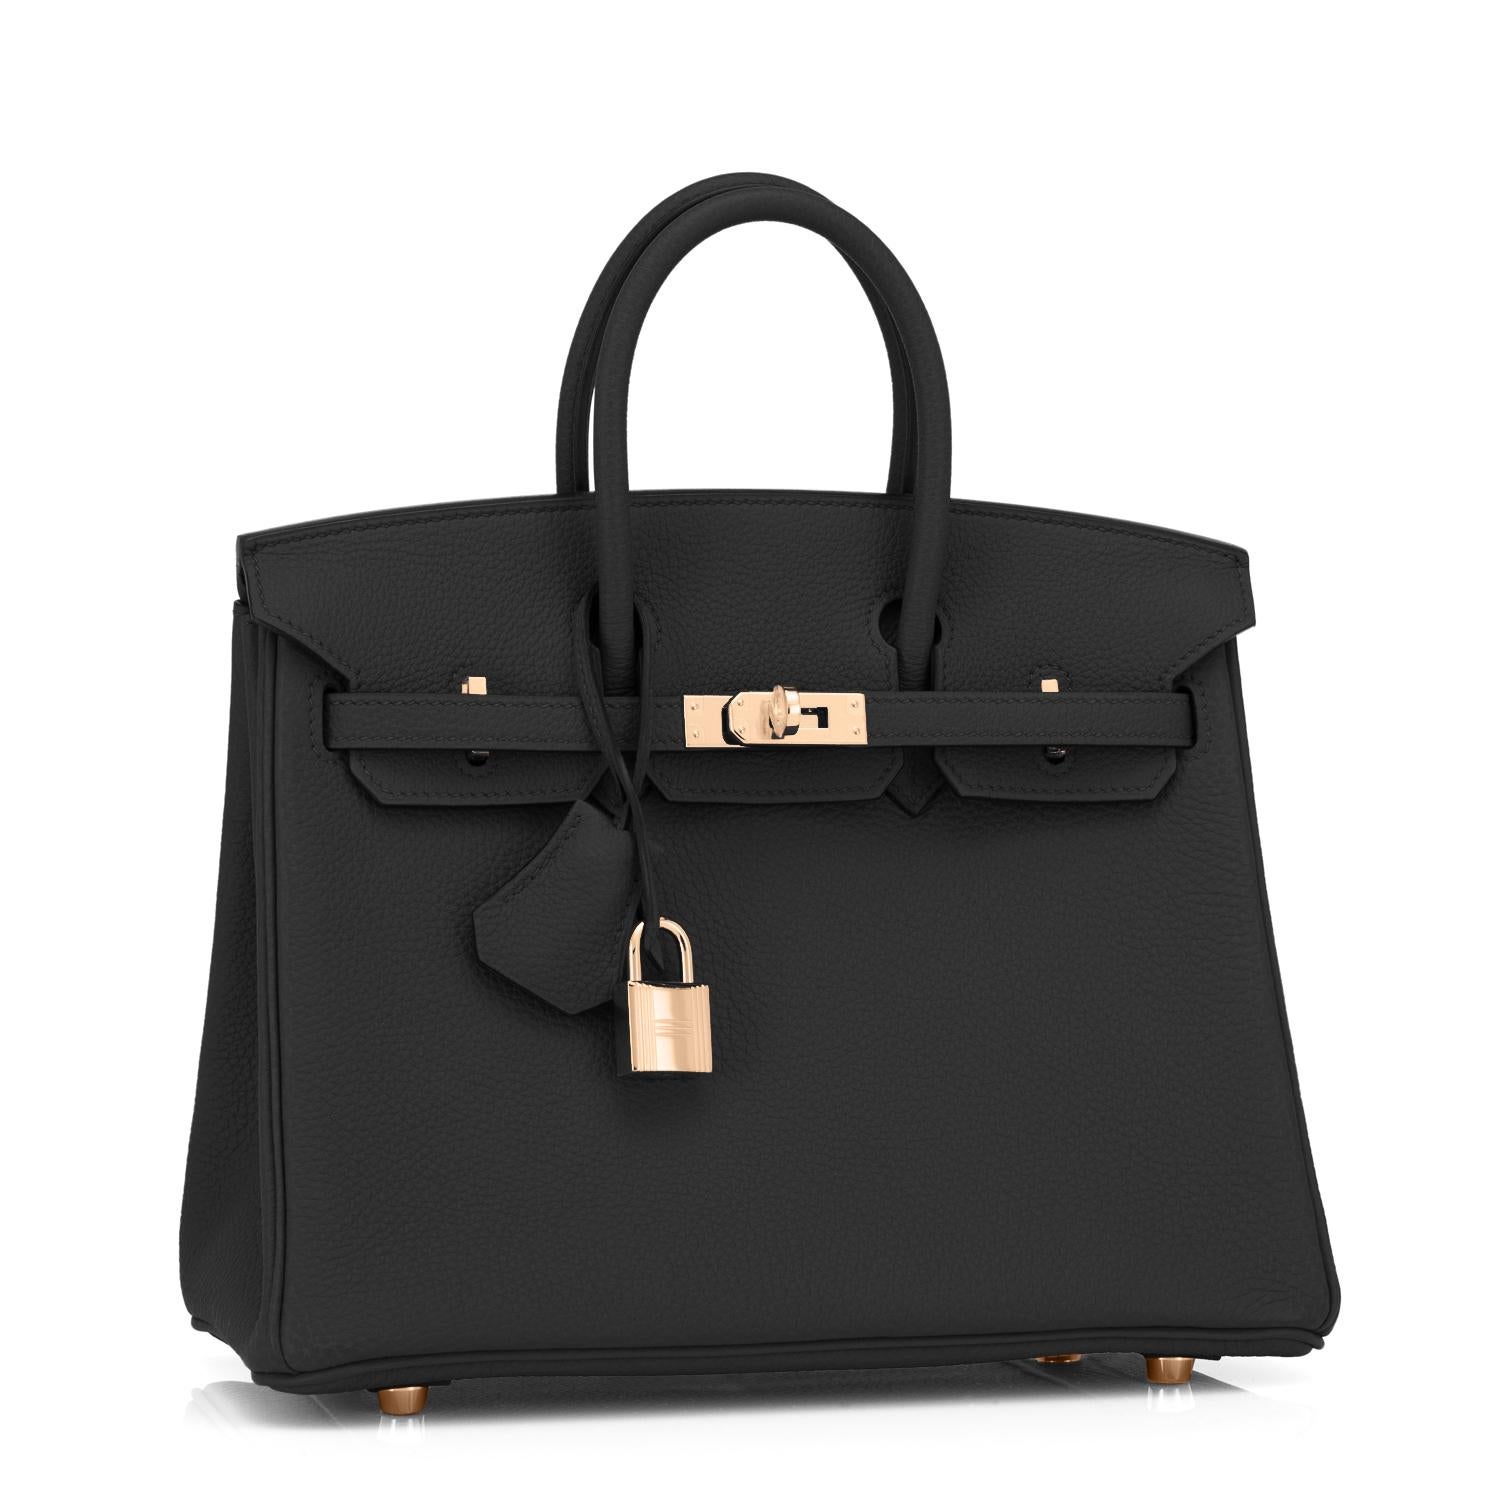 Hermes Birkin 25 Black Togo Rose Gold Hardware Bag Z Stamp, 2021
Rose Gold hardware is so rare in production; this is the most coveted combo for fall!
Brand New in Box. Store Fresh. Pristine Condition (with plastic on hardware) 
Just purchased from